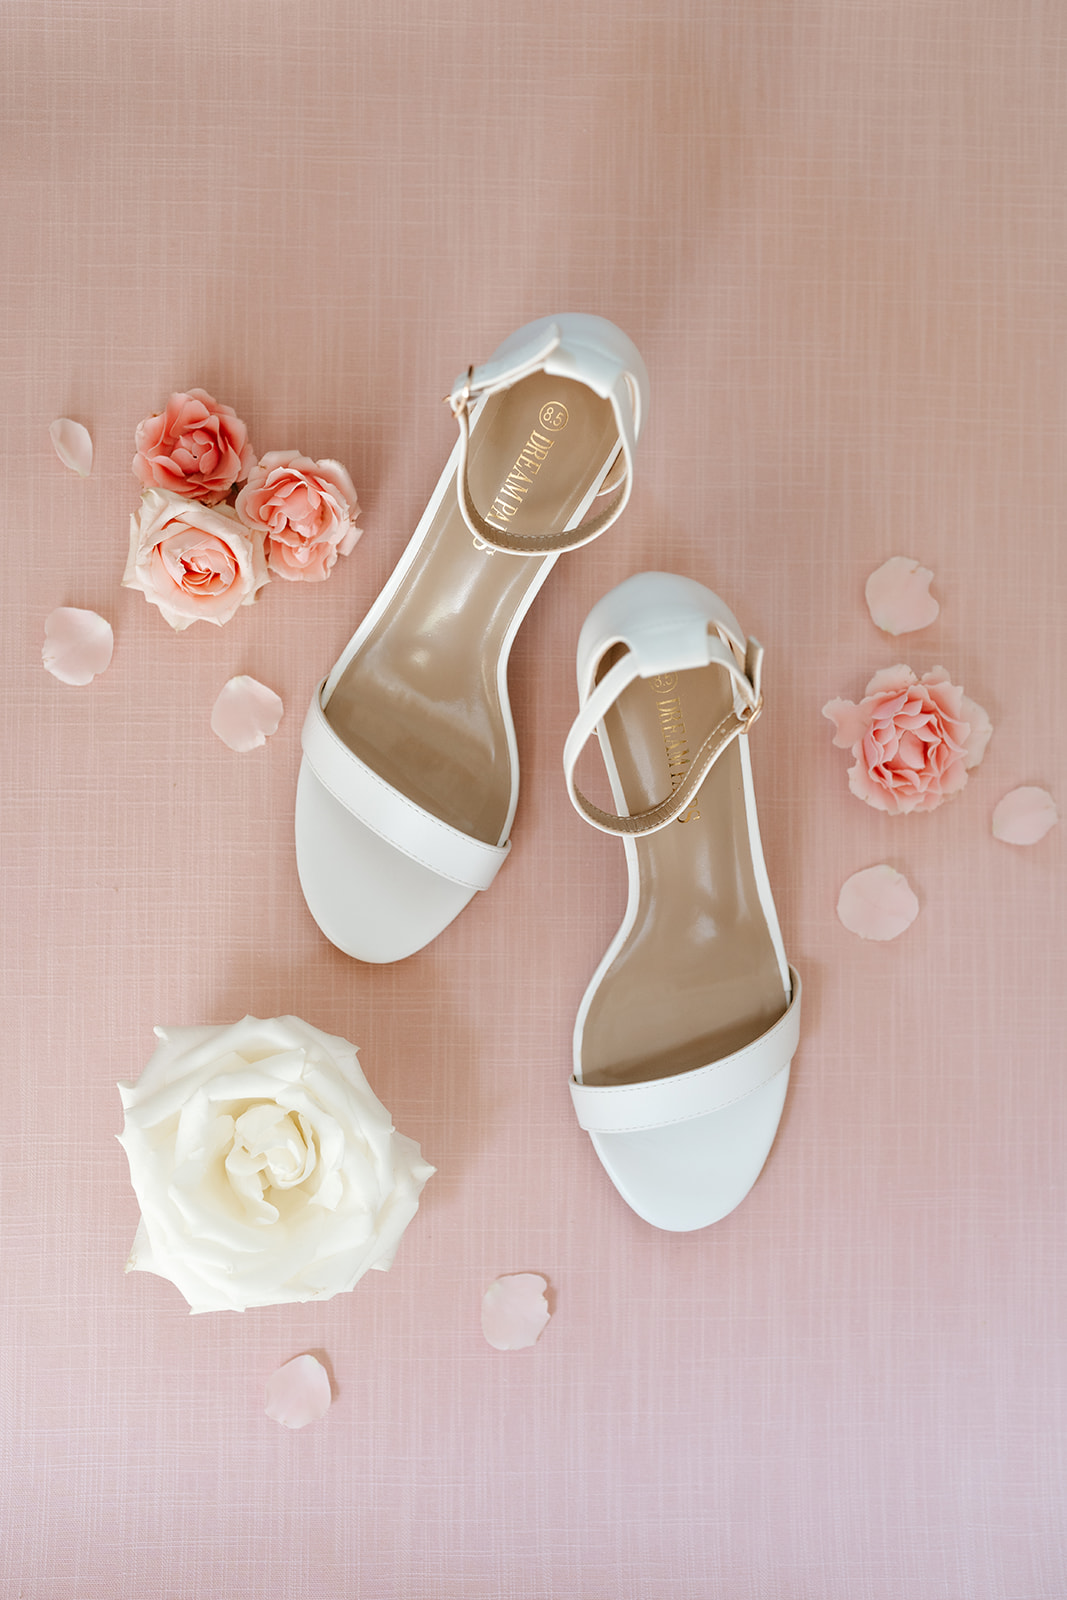 A pair of white women's high heel shoes arranged neatly on a pink background, surrounded by scattered rose petals and a few full blooms.